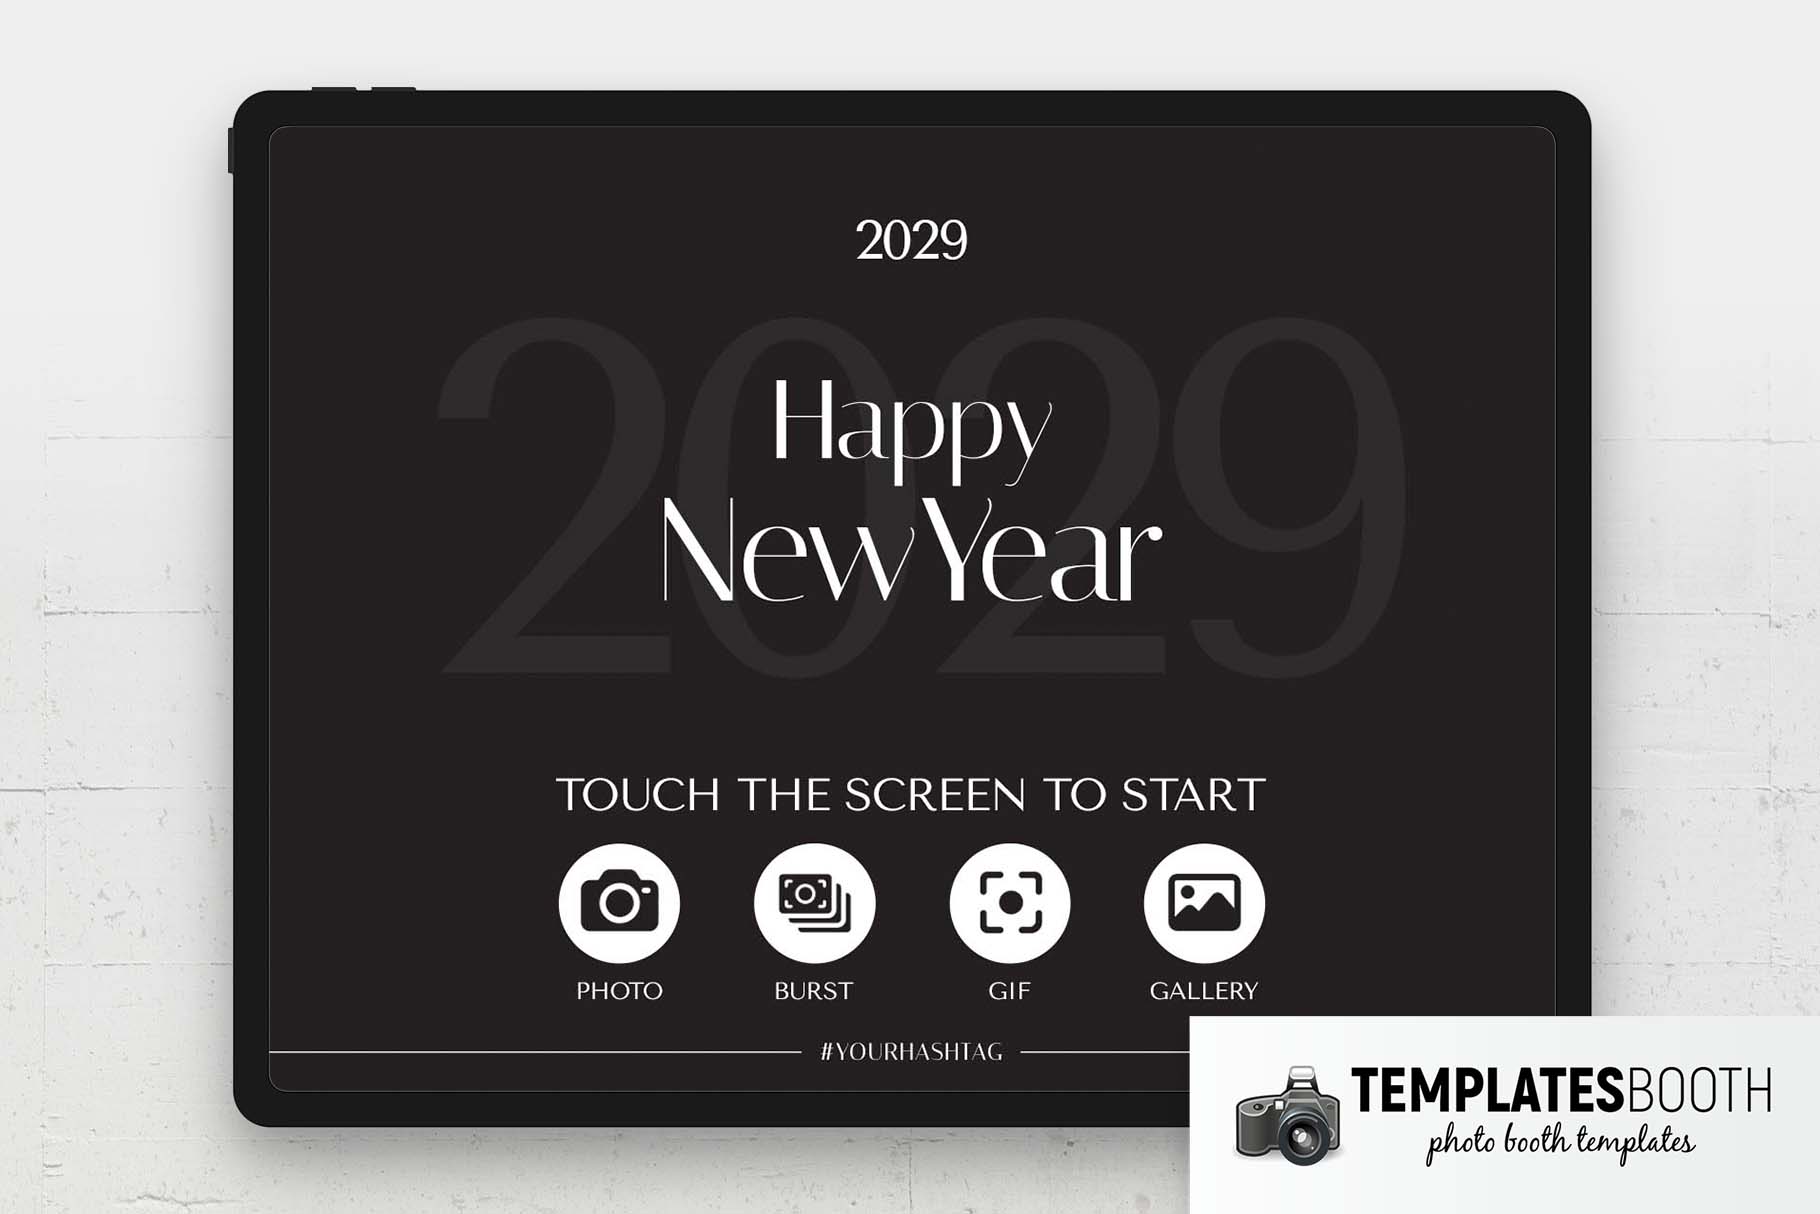 New Year Gala Photo Booth Welcome Screen